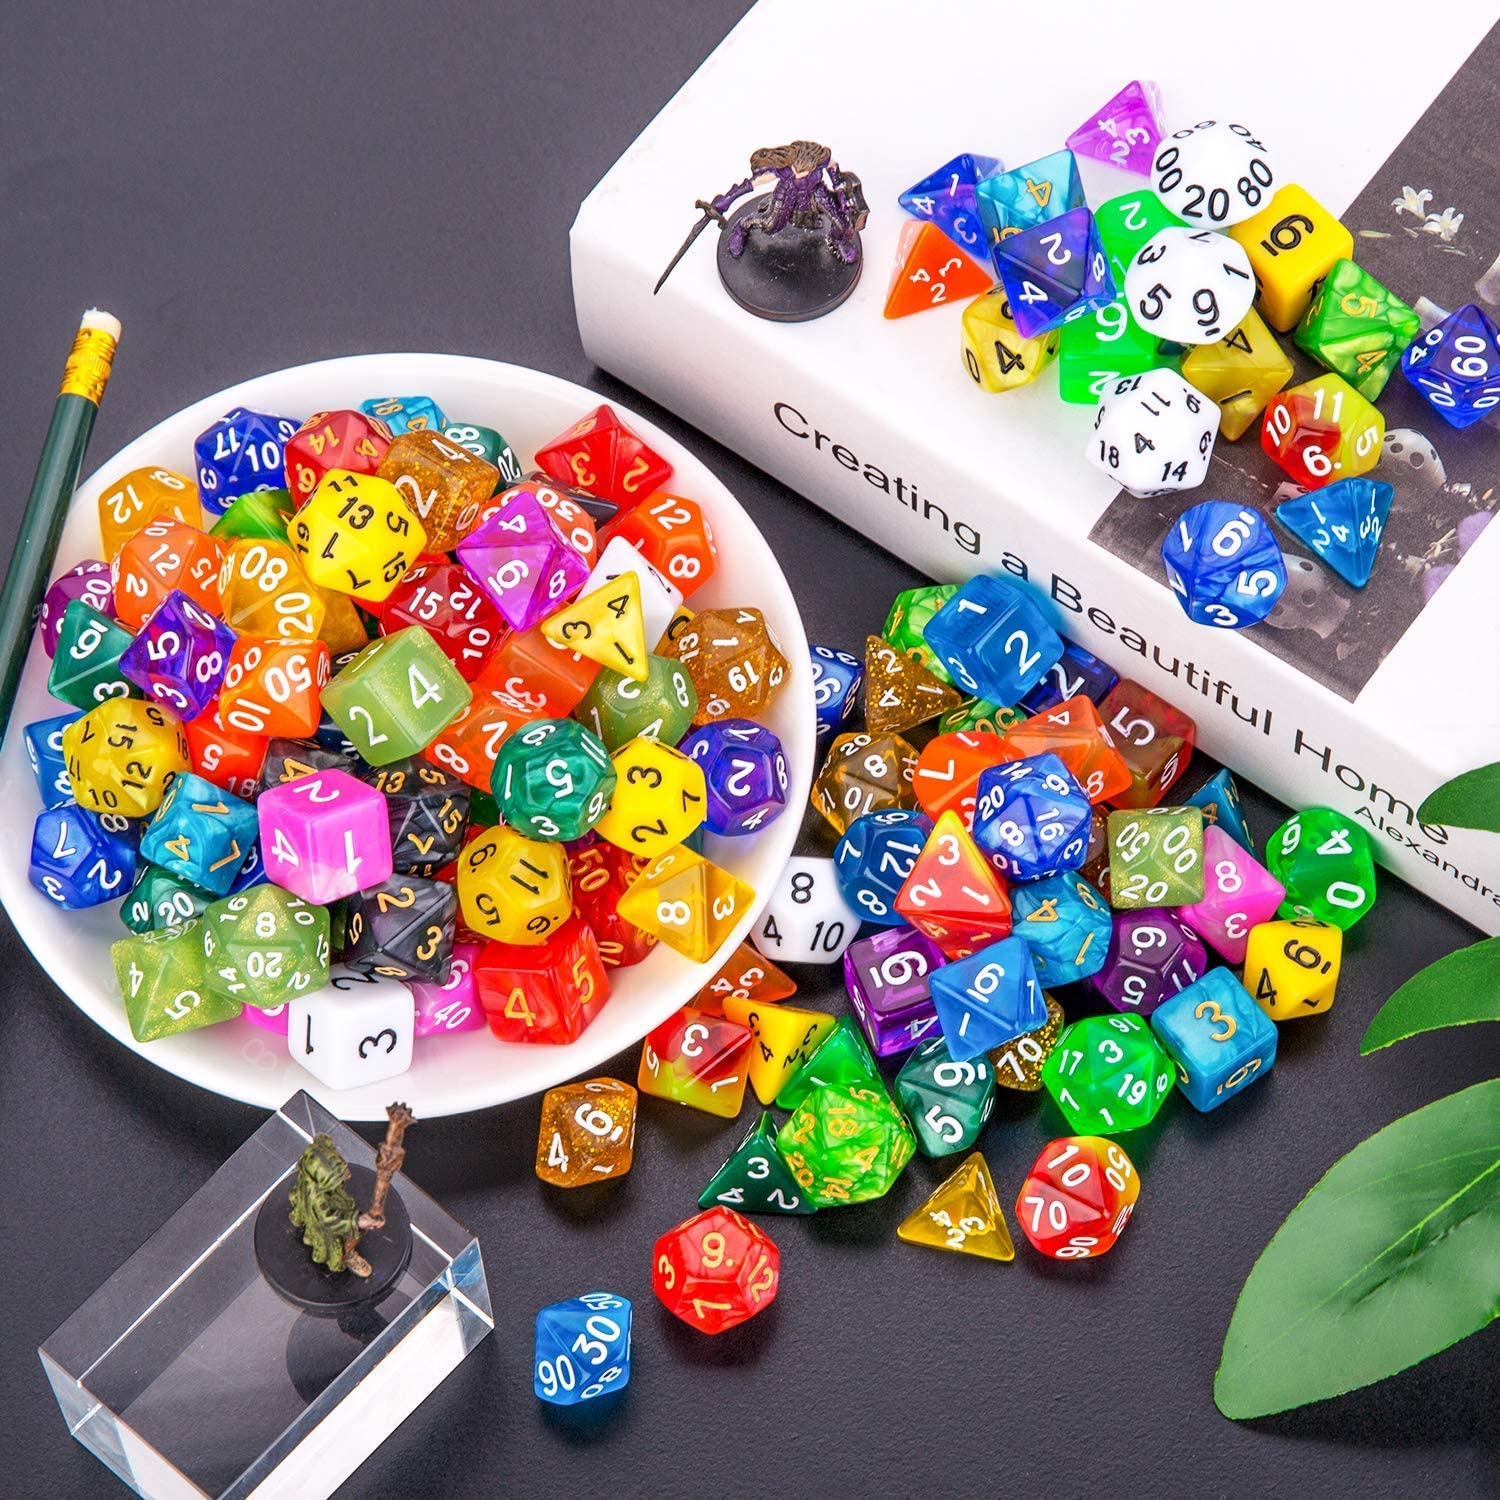 D4 D6 D8 D10 D12 D20 with Bag 140 PCs DND Polyhedral Dice 20 Pack RPG MTG Dungeons and Dragons Dice Set Rolling Dice for Table Games 